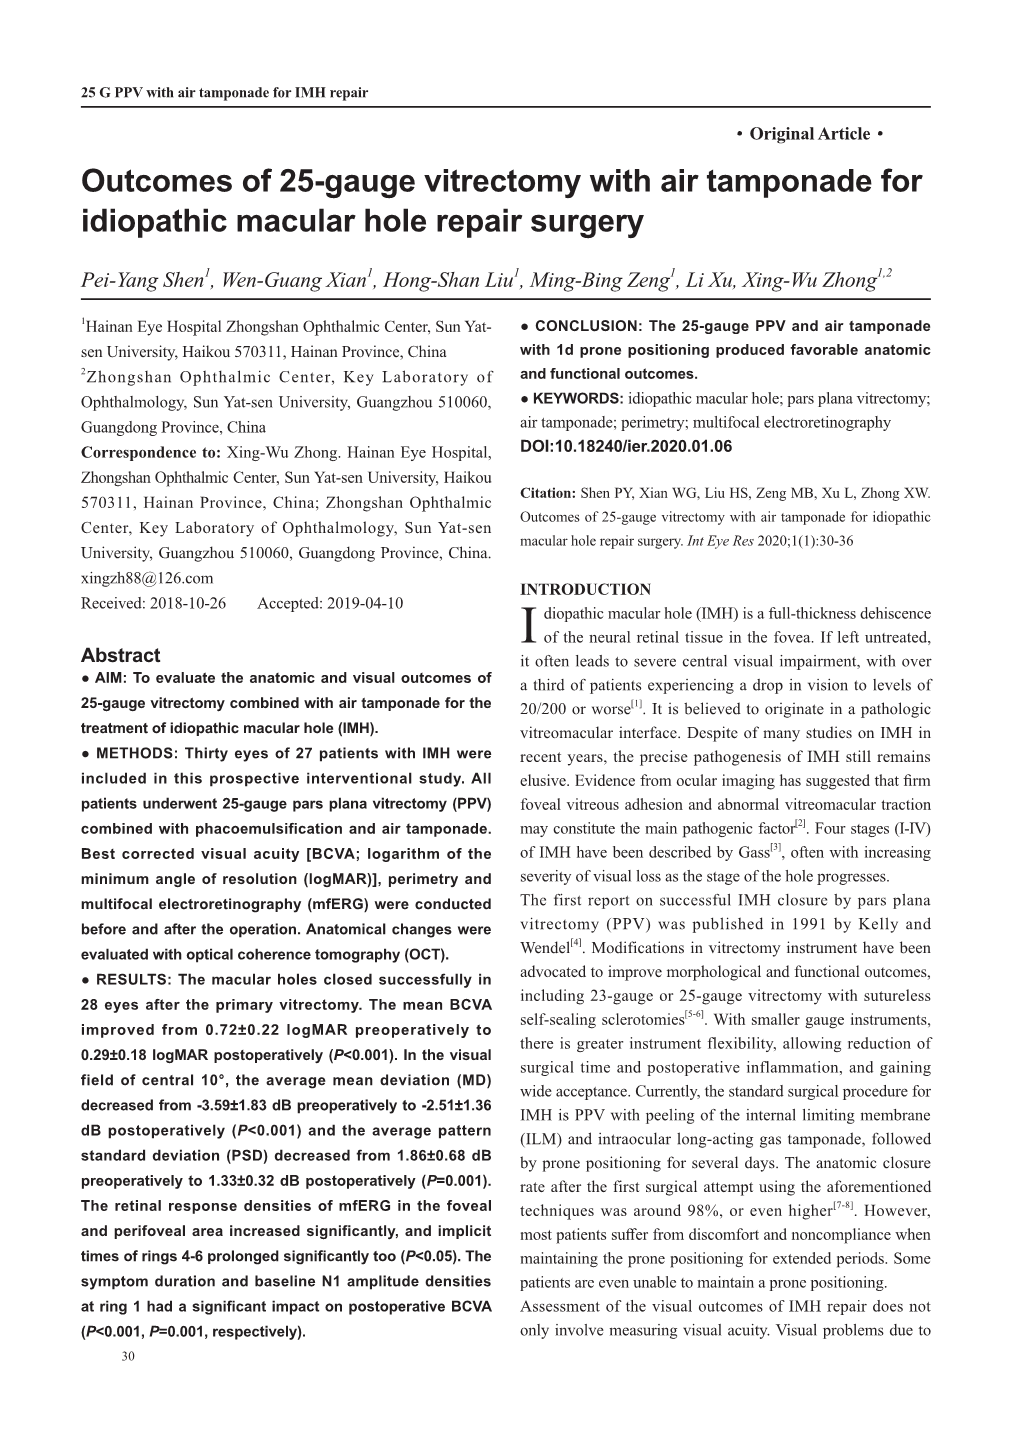 Outcomes of 25-Gauge Vitrectomy with Air Tamponade for Idiopathic Macular Hole Repair Surgery